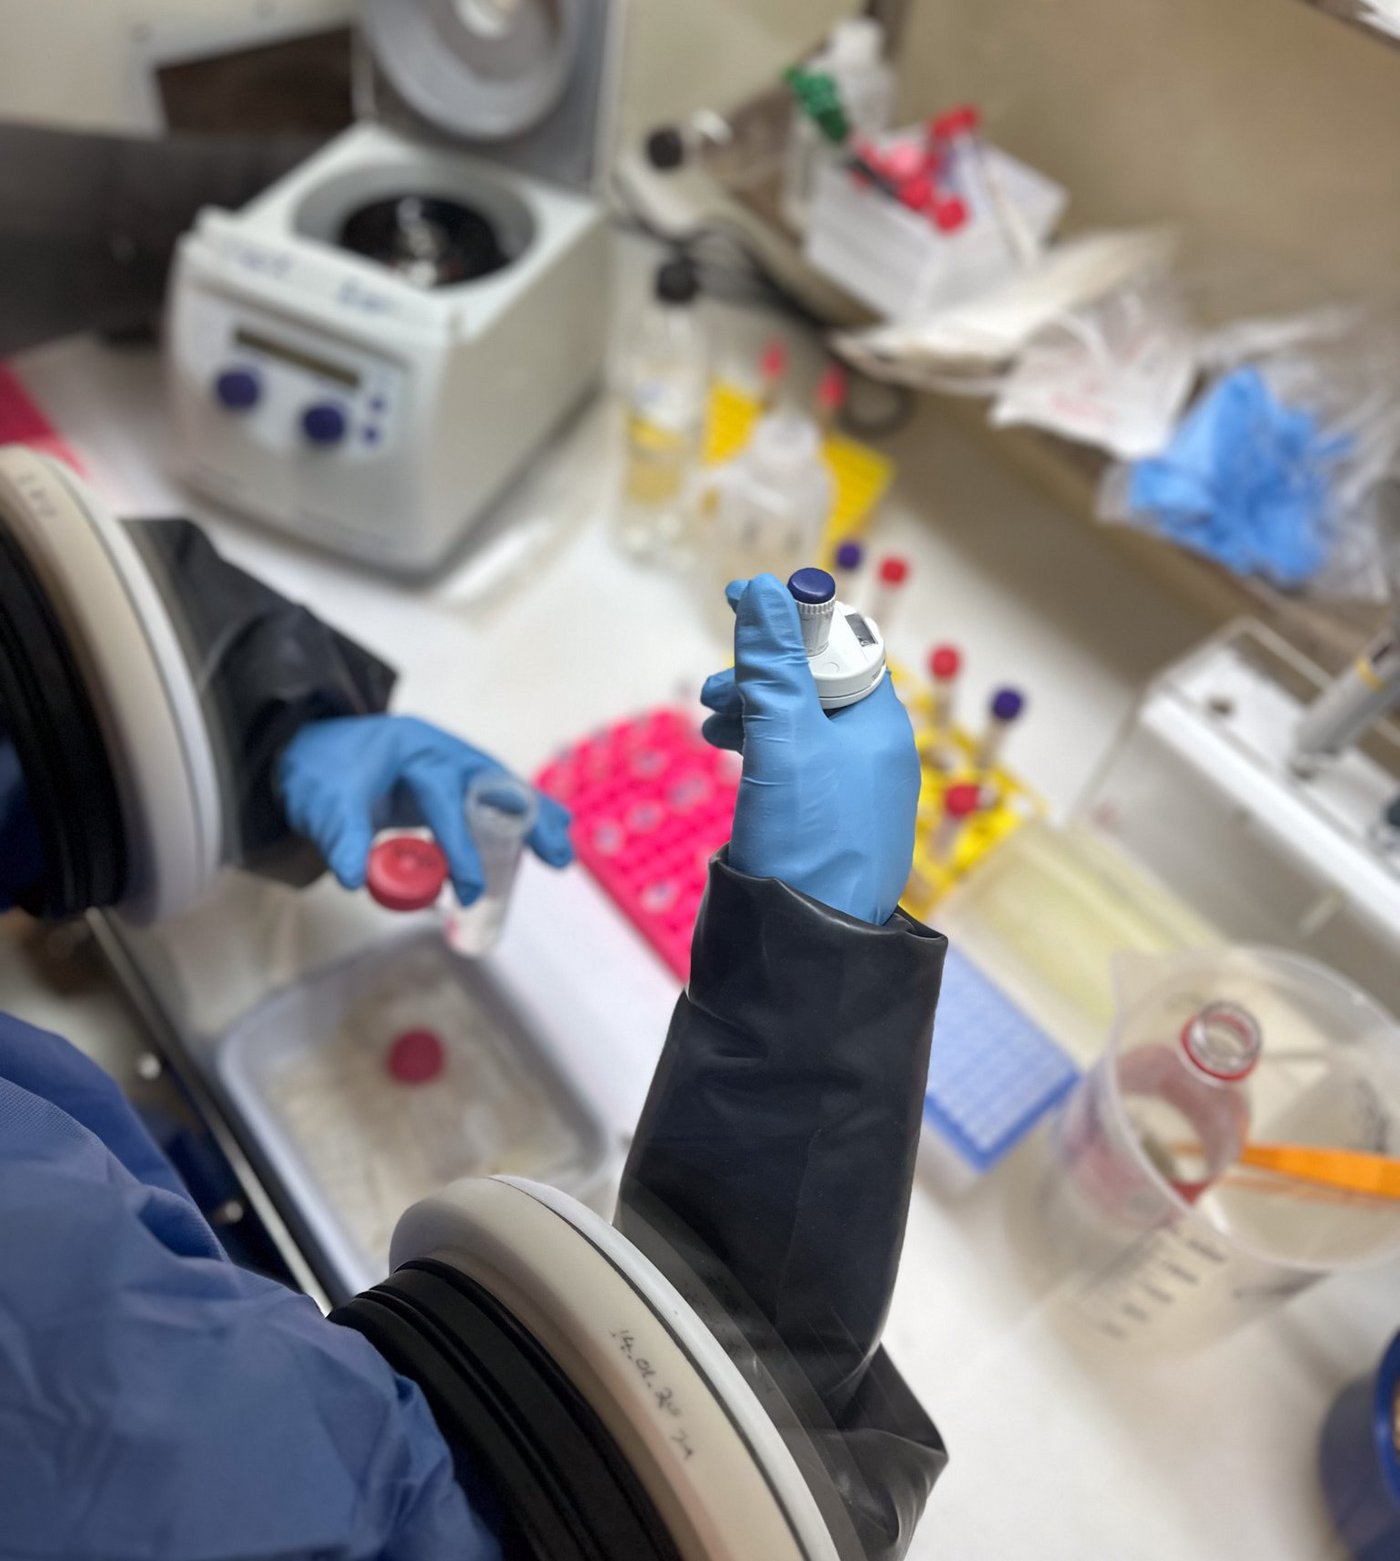 The photo shows two hands in blue gloves working with the glove box.